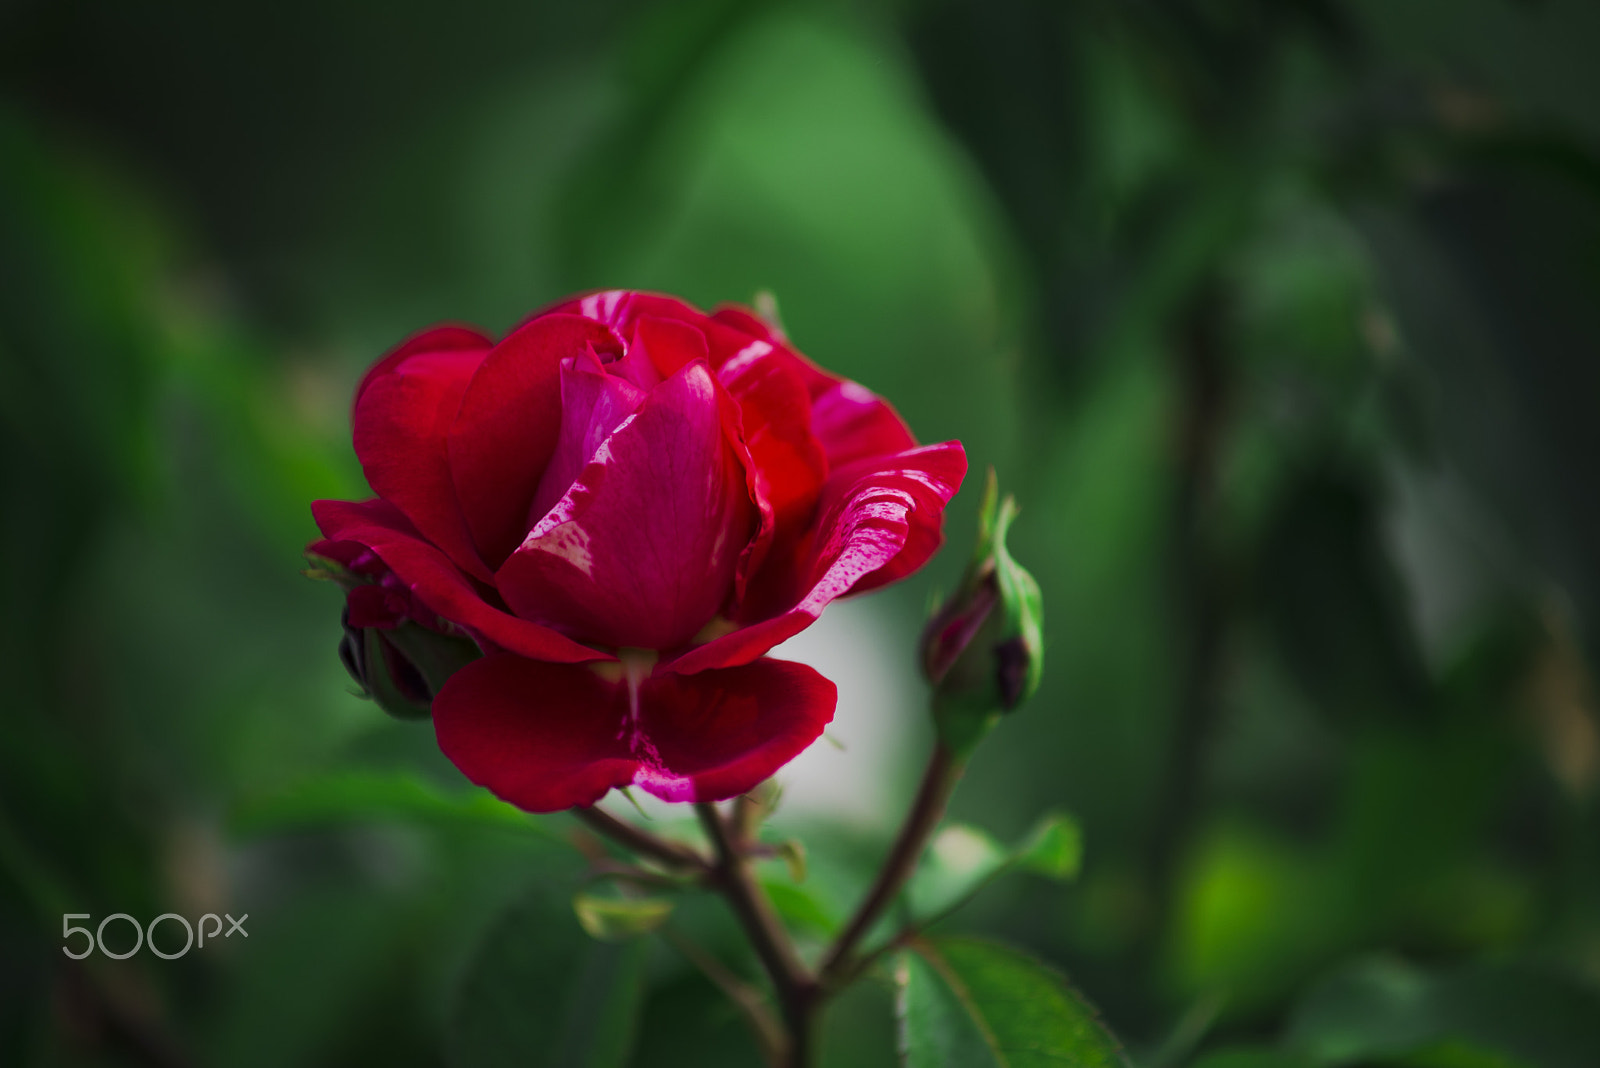 Nikon D800 sample photo. Red rose in green photography